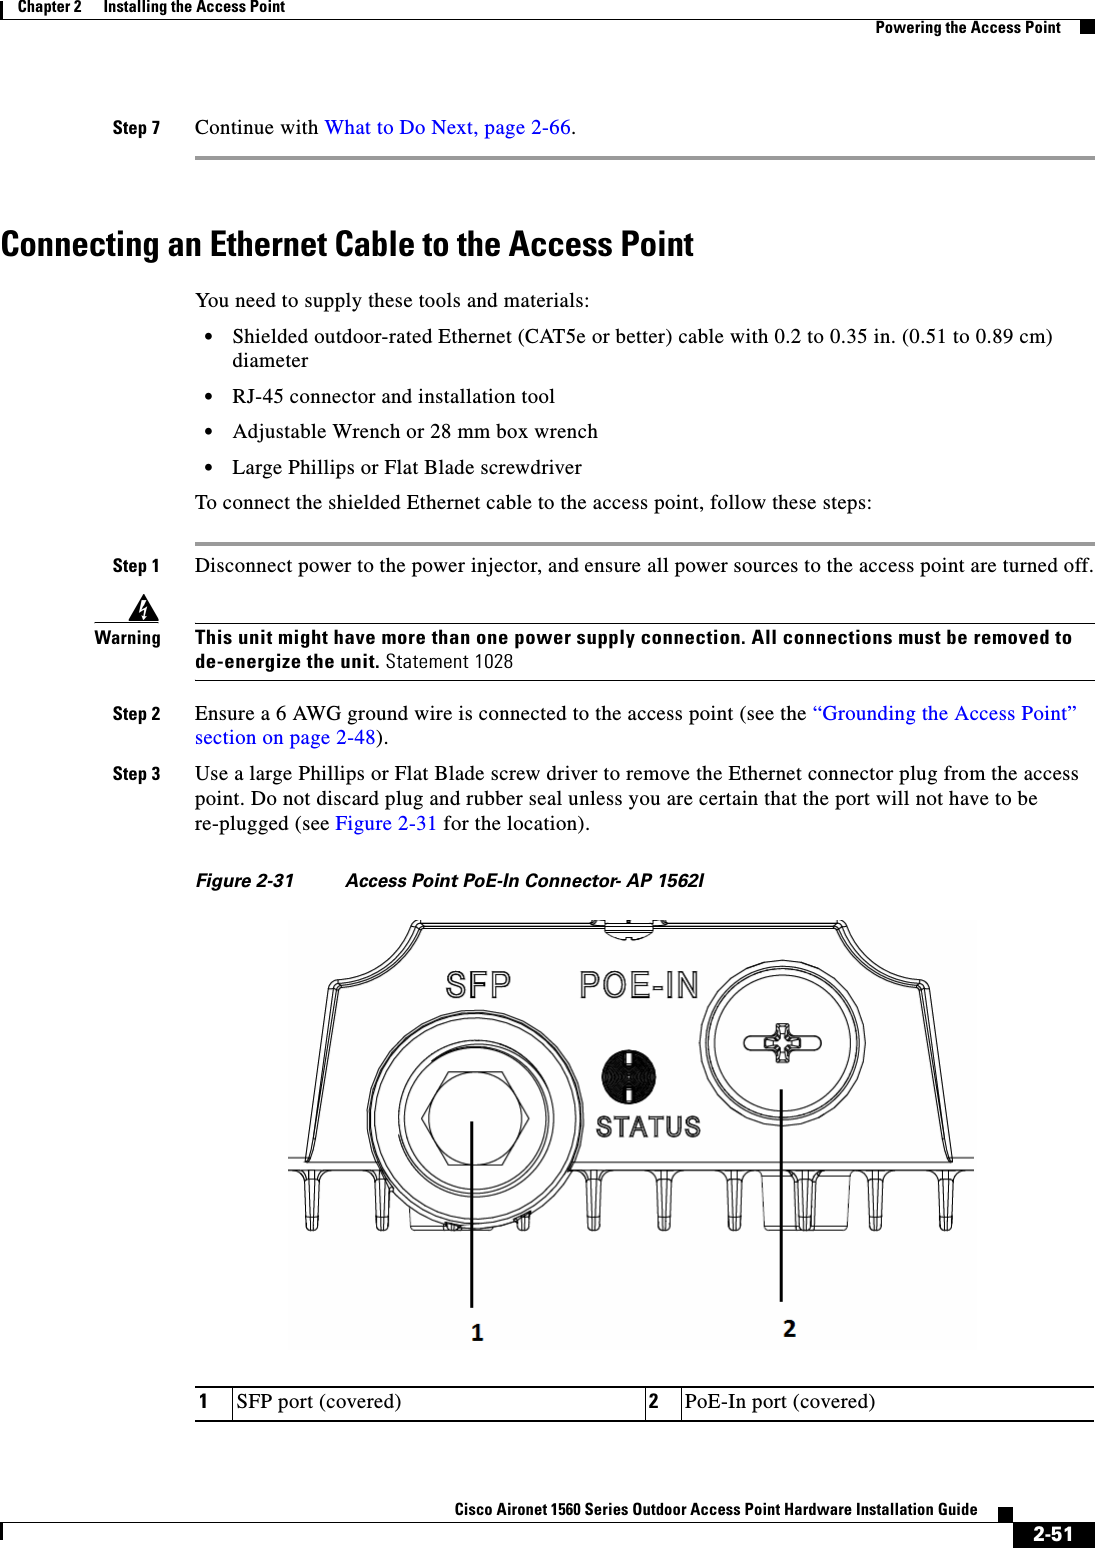  2-51Cisco Aironet 1560 Series Outdoor Access Point Hardware Installation Guide Chapter 2      Installing the Access PointPowering the Access PointStep 7 Continue with What to Do Next, page 2-66.Connecting an Ethernet Cable to the Access Point You need to supply these tools and materials:•Shielded outdoor-rated Ethernet (CAT5e or better) cable with 0.2 to 0.35 in. (0.51 to 0.89 cm) diameter•RJ-45 connector and installation tool•Adjustable Wrench or 28 mm box wrench•Large Phillips or Flat Blade screwdriverTo connect the shielded Ethernet cable to the access point, follow these steps:Step 1 Disconnect power to the power injector, and ensure all power sources to the access point are turned off.WarningThis unit might have more than one power supply connection. All connections must be removed to de-energize the unit. Statement 1028Step 2 Ensure a 6 AWG ground wire is connected to the access point (see the “Grounding the Access Point” section on page 2-48).Step 3 Use a large Phillips or Flat Blade screw driver to remove the Ethernet connector plug from the access point. Do not discard plug and rubber seal unless you are certain that the port will not have to be re-plugged (see Figure 2-31 for the location).Figure 2-31 Access Point PoE-In Connector- AP 1562I1SFP port (covered) 2PoE-In port (covered)